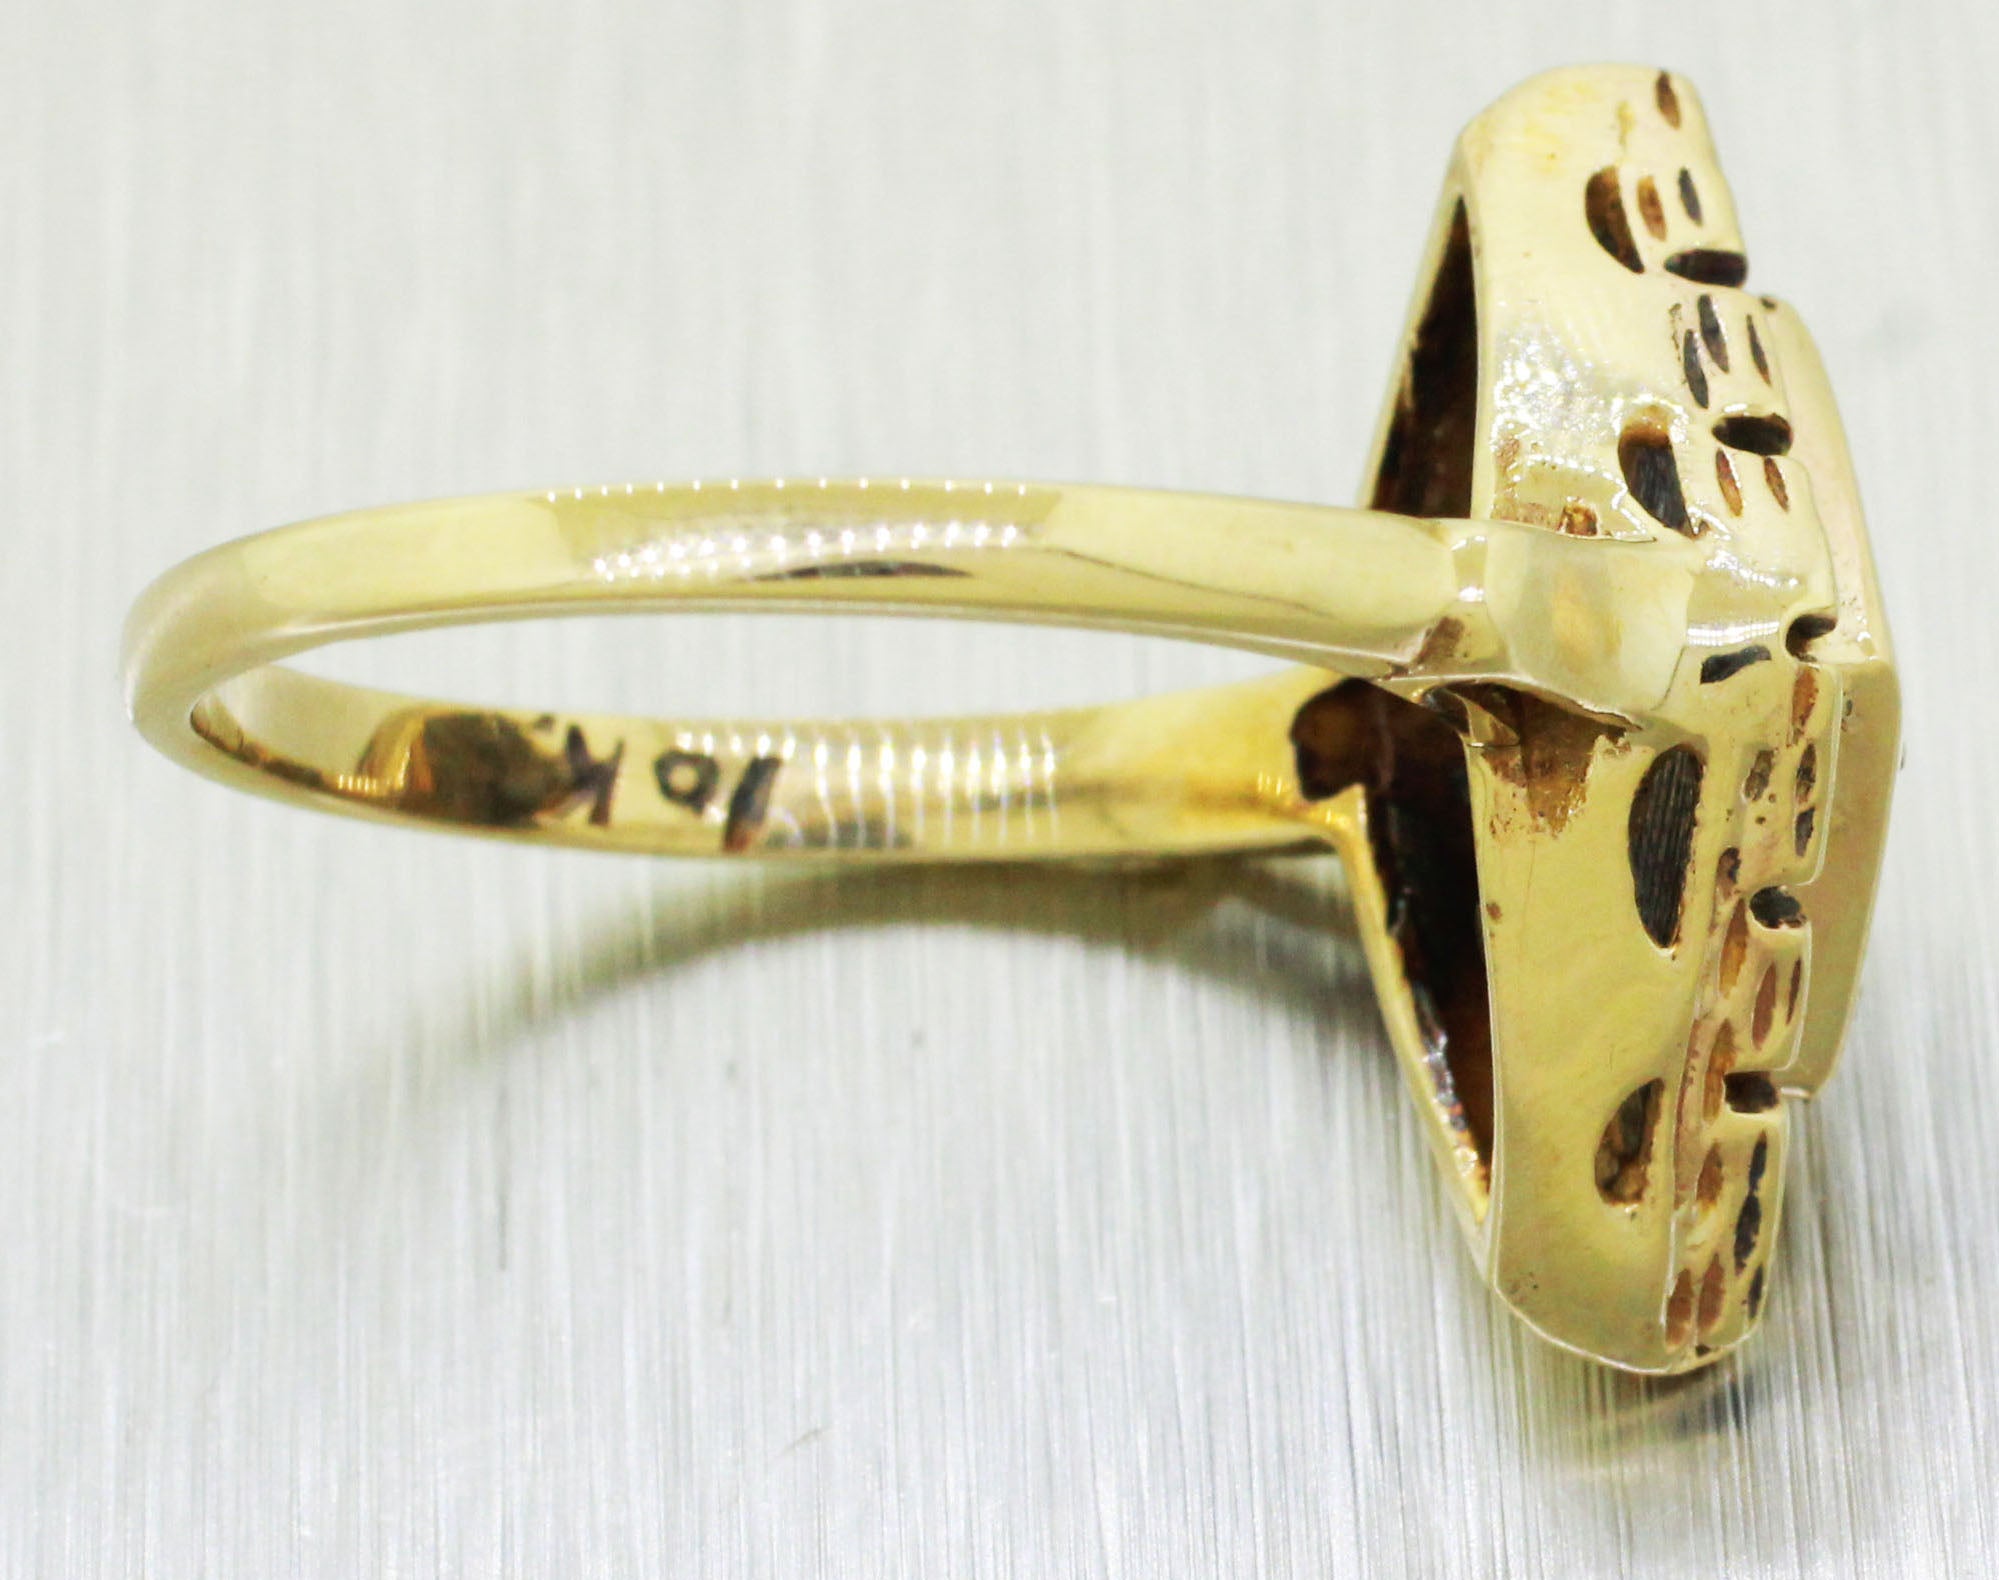 Vintage Estate 10k Solid Yellow Gold Nugget Rhombus Cocktail Ring